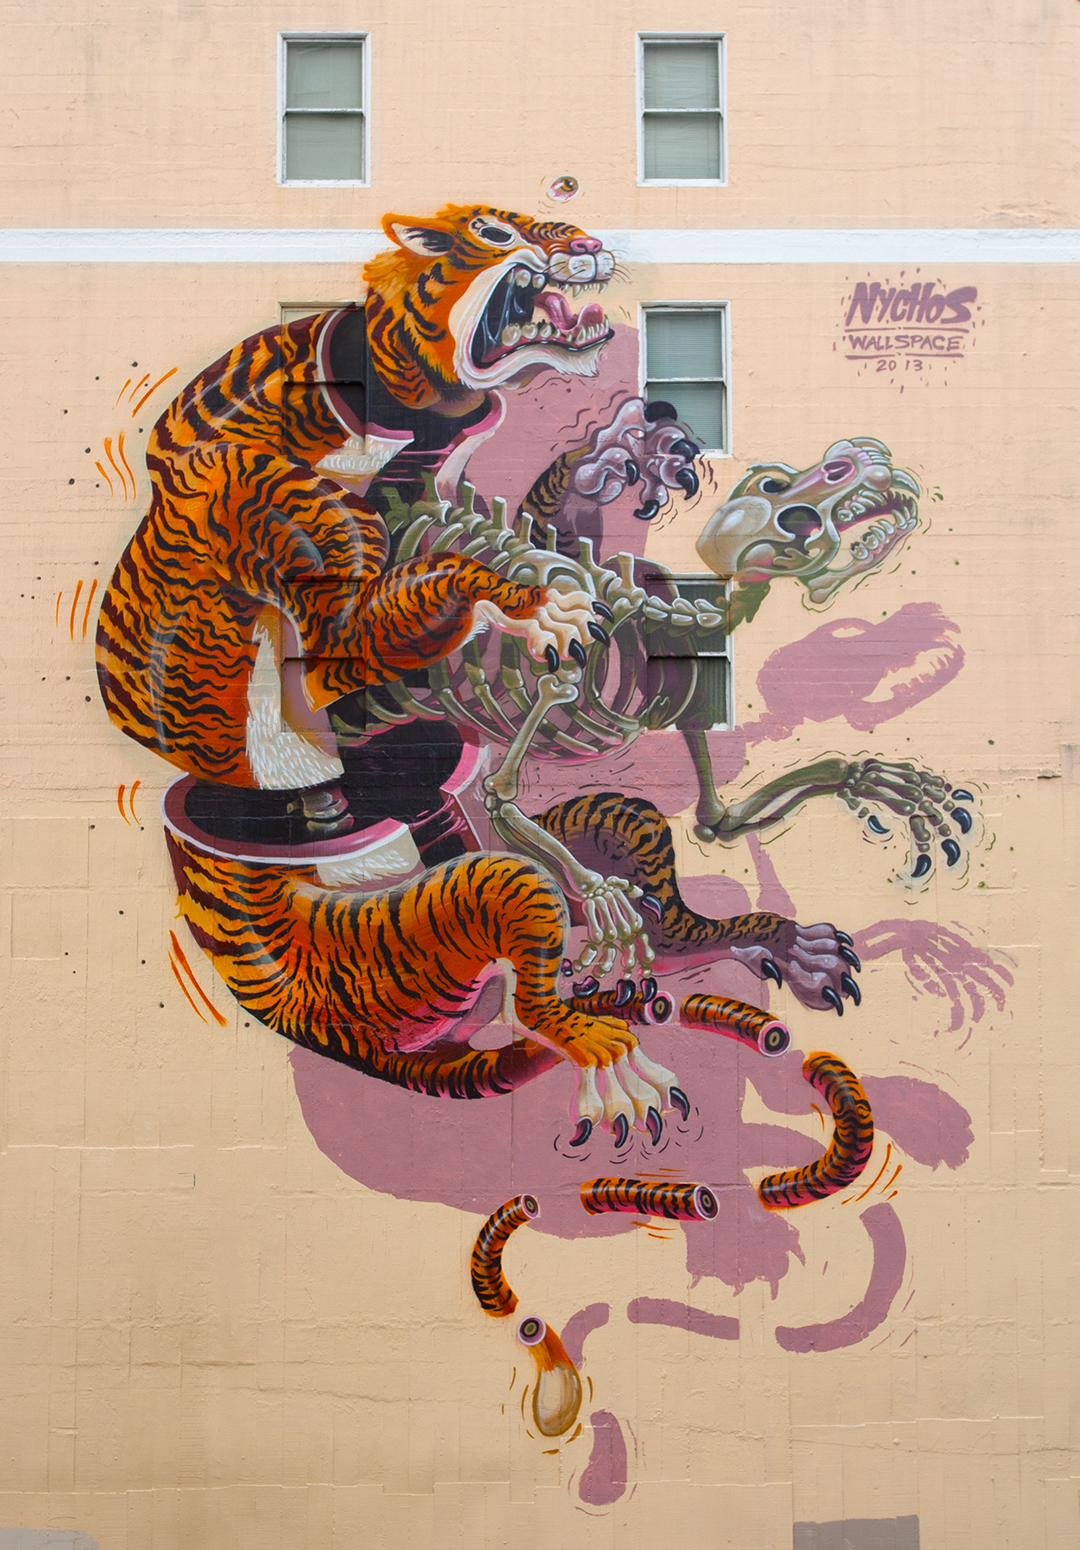 Nychos HD Photos And Wallpaper Directory